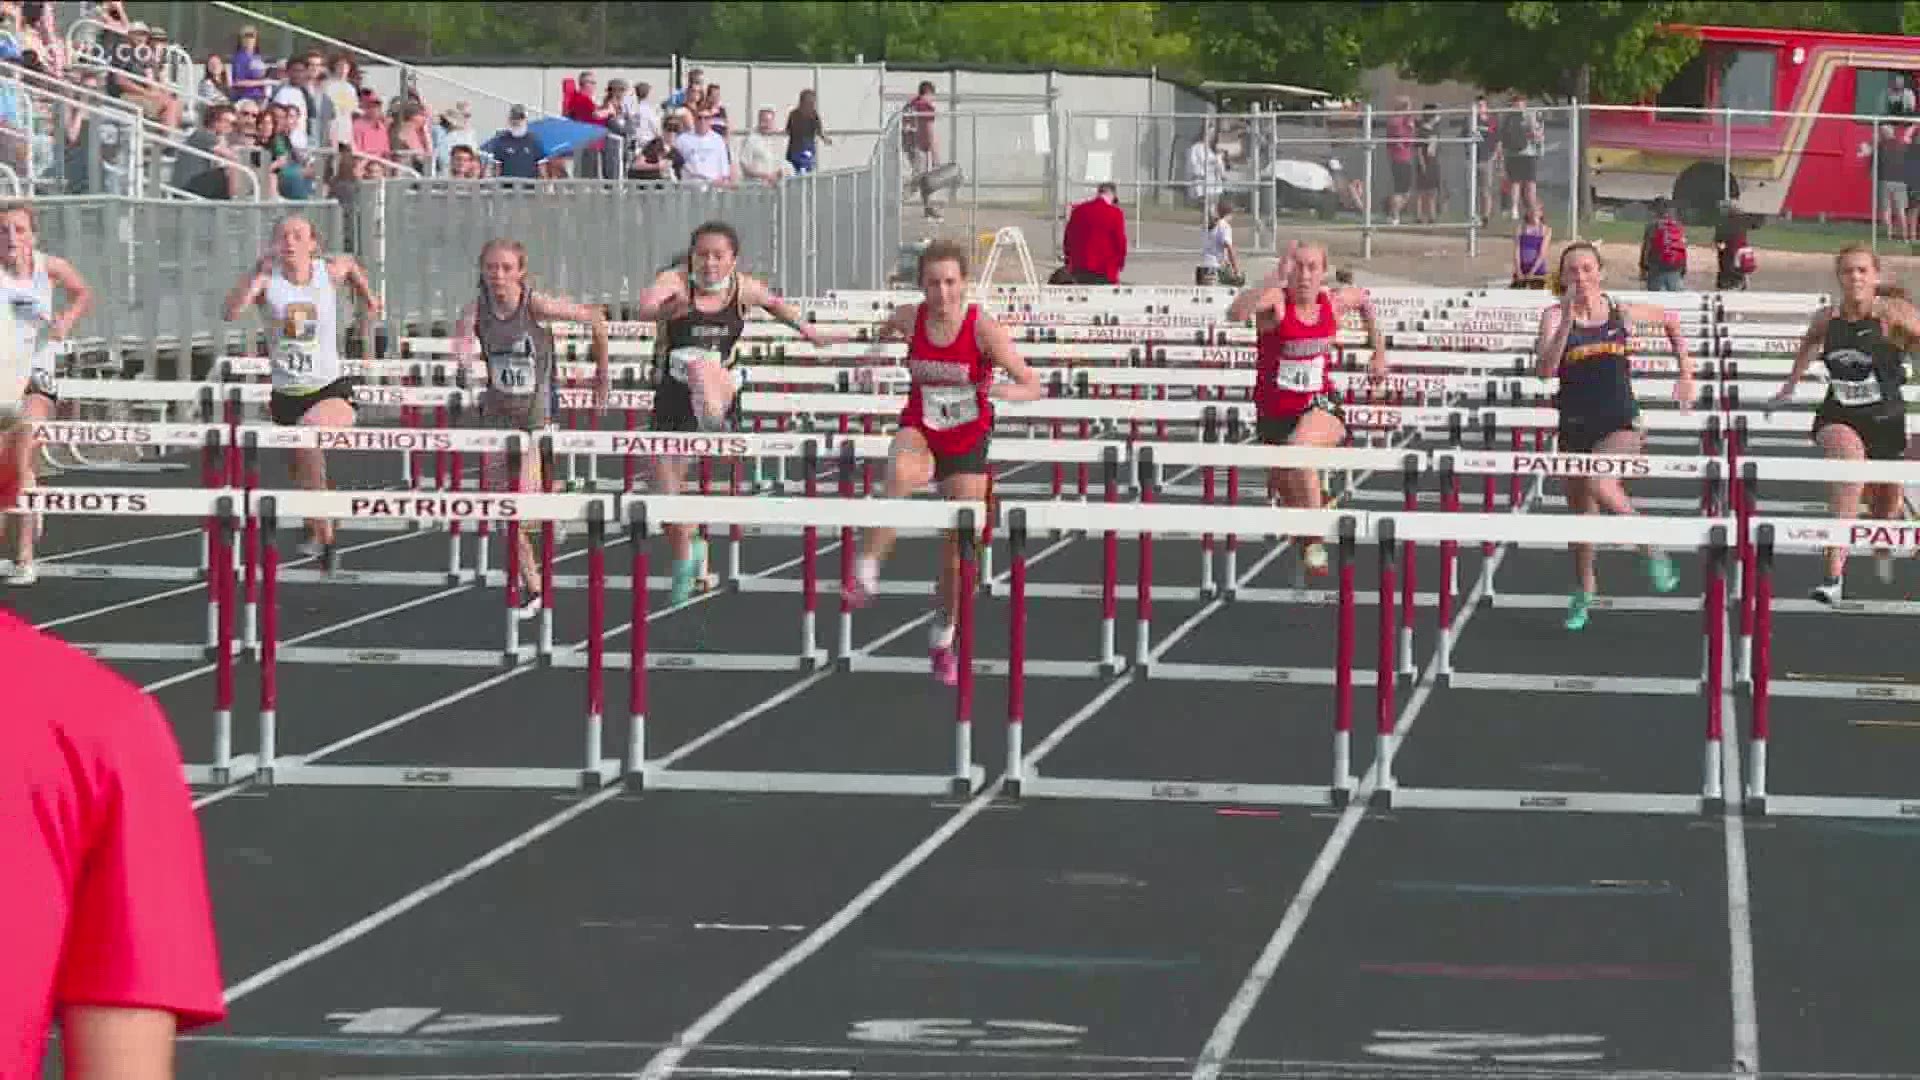 The championship meet was held at Centennial High School in Boise on Friday, May 14.